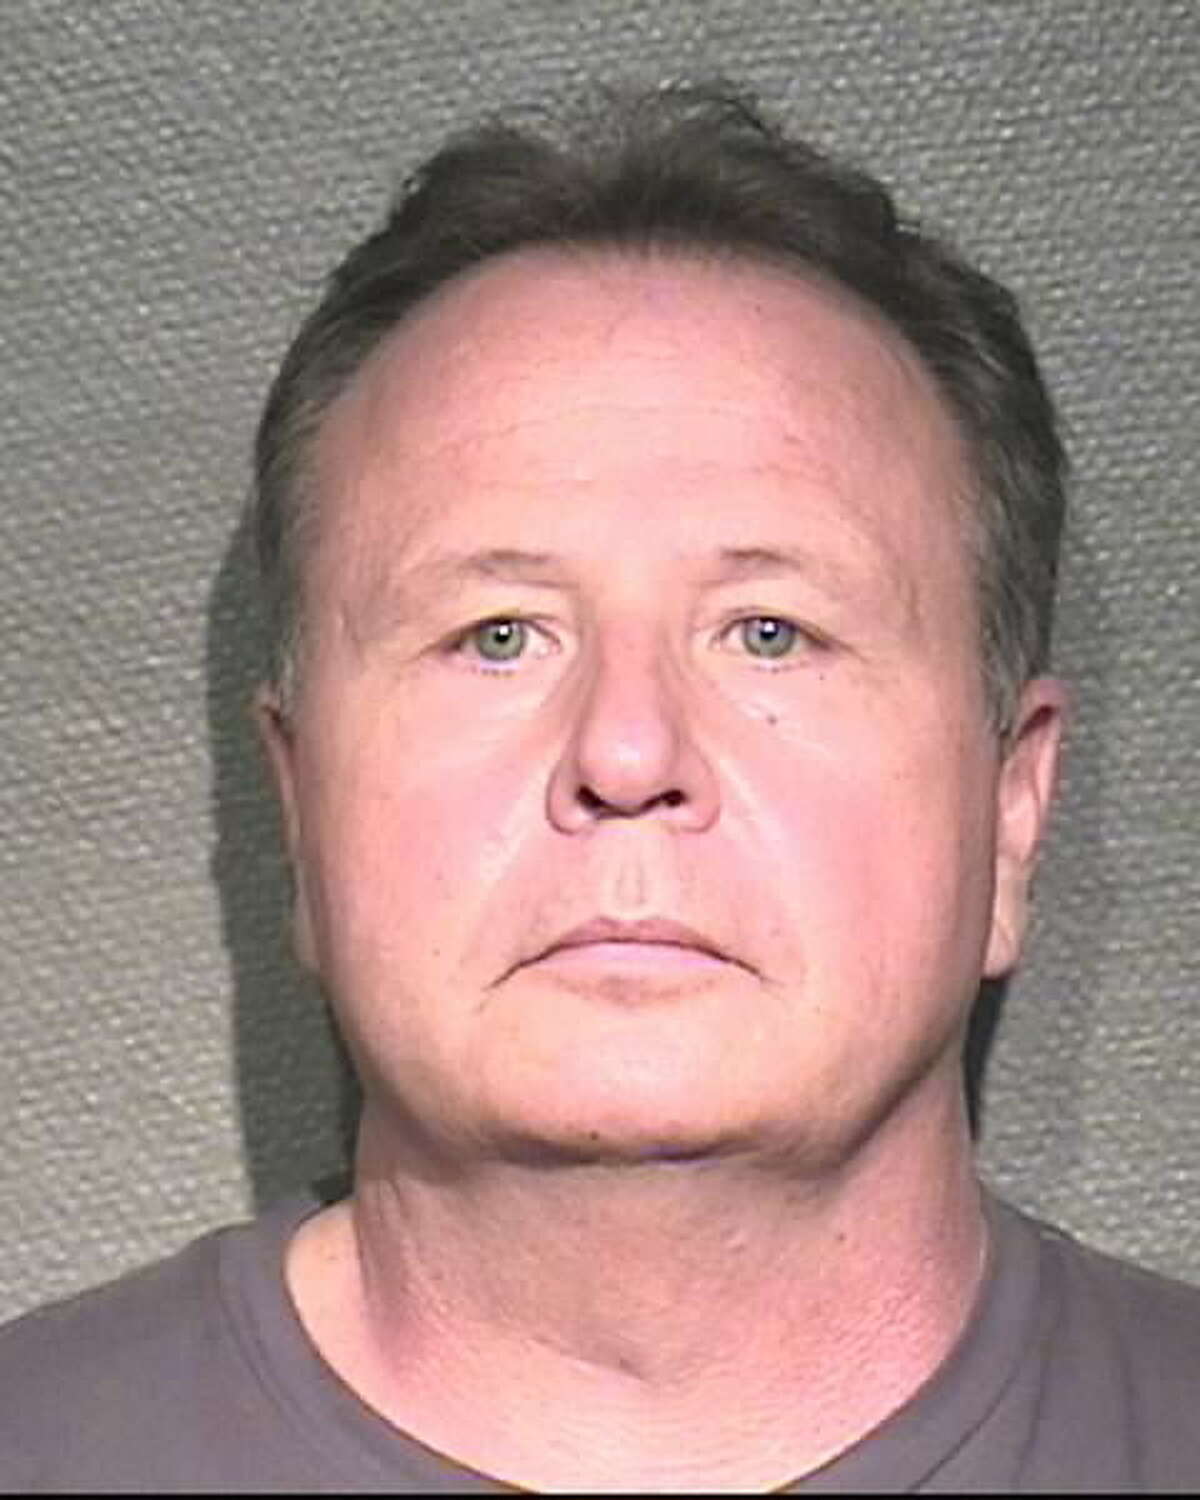 Robert Teweleit is a longtime officer with the Houston Police Department who was arrested and charged with prostitution during a 10-day sting at a former massage parlor turned brothel that was taken over in early October by HPD.